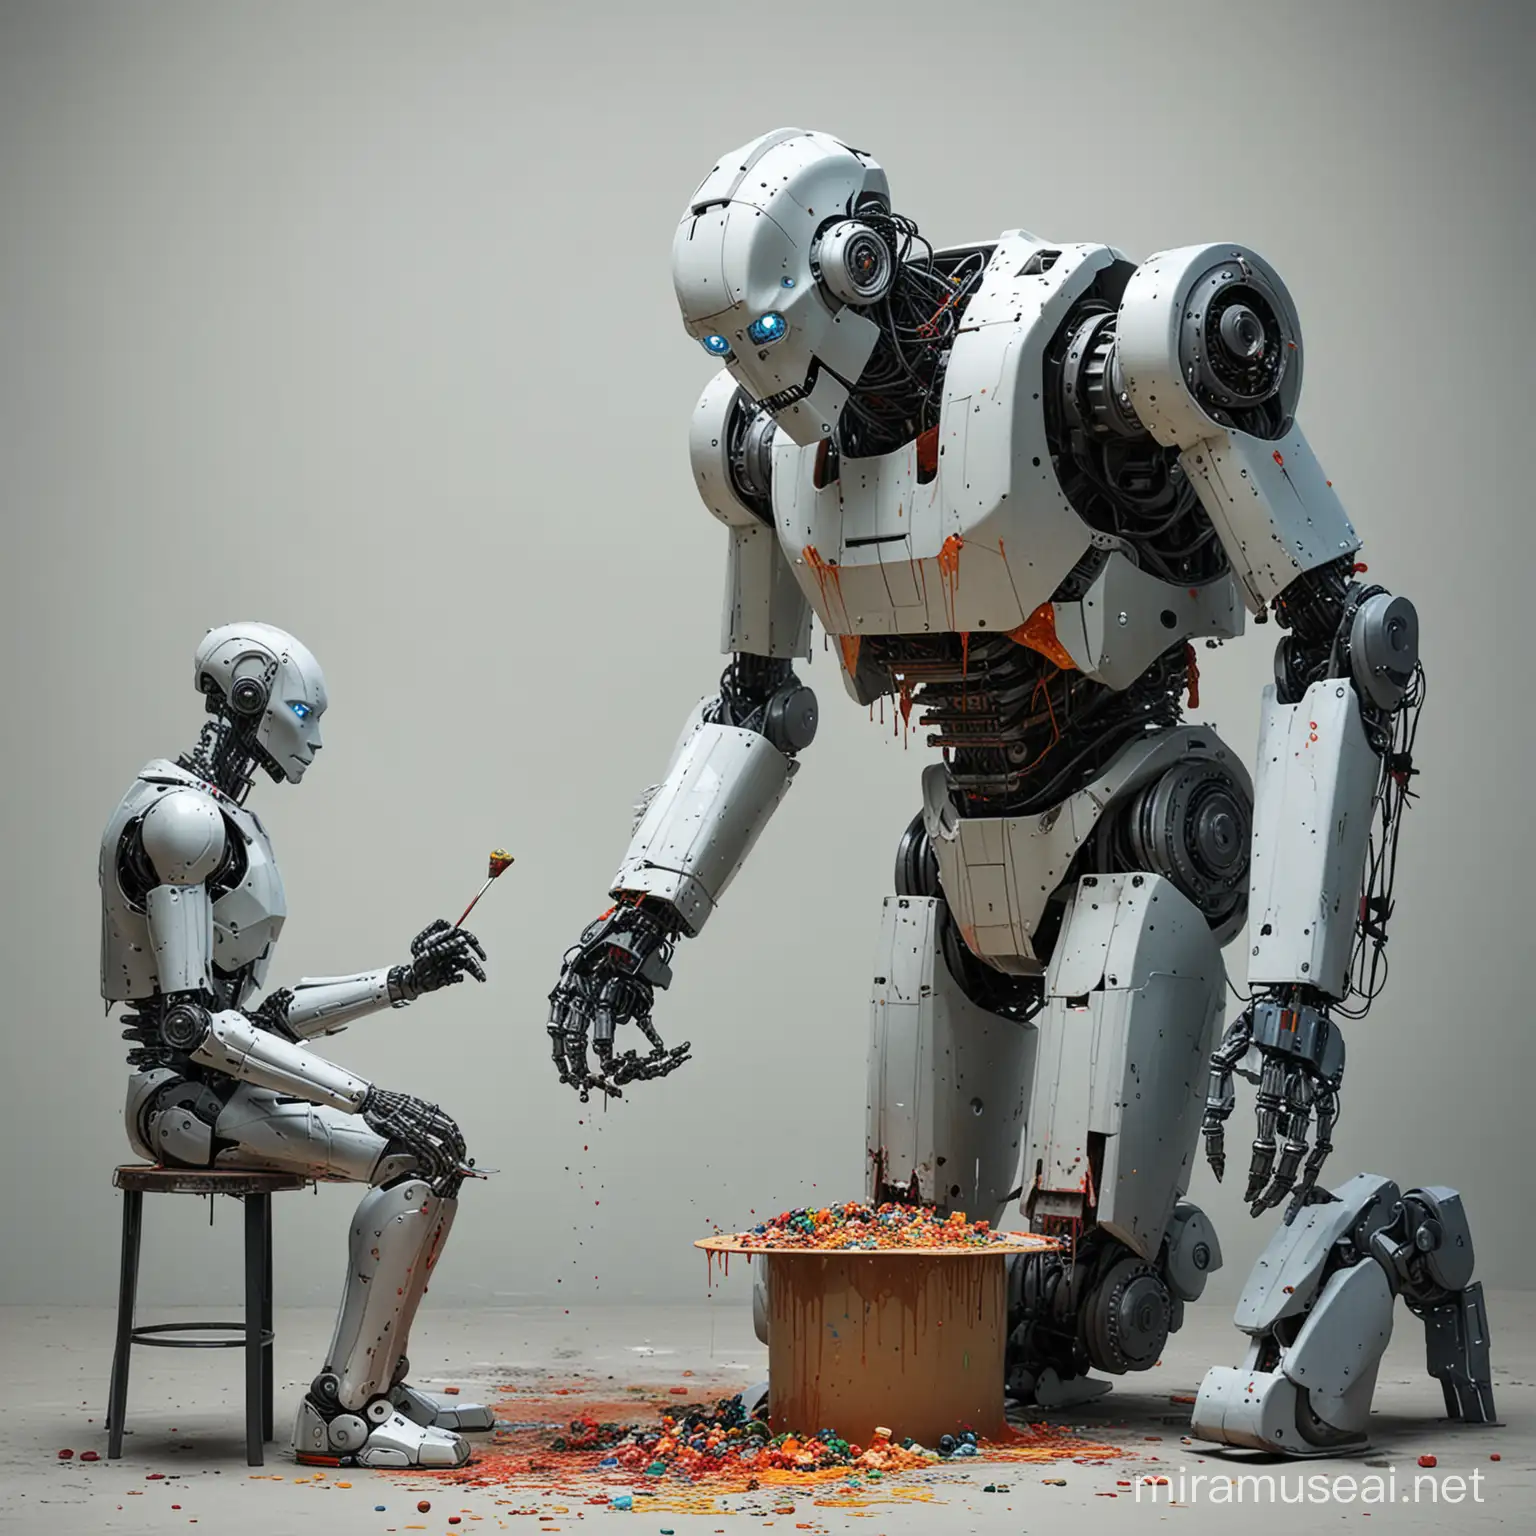 Robot Painting in the Presence of a Giant Human Eating